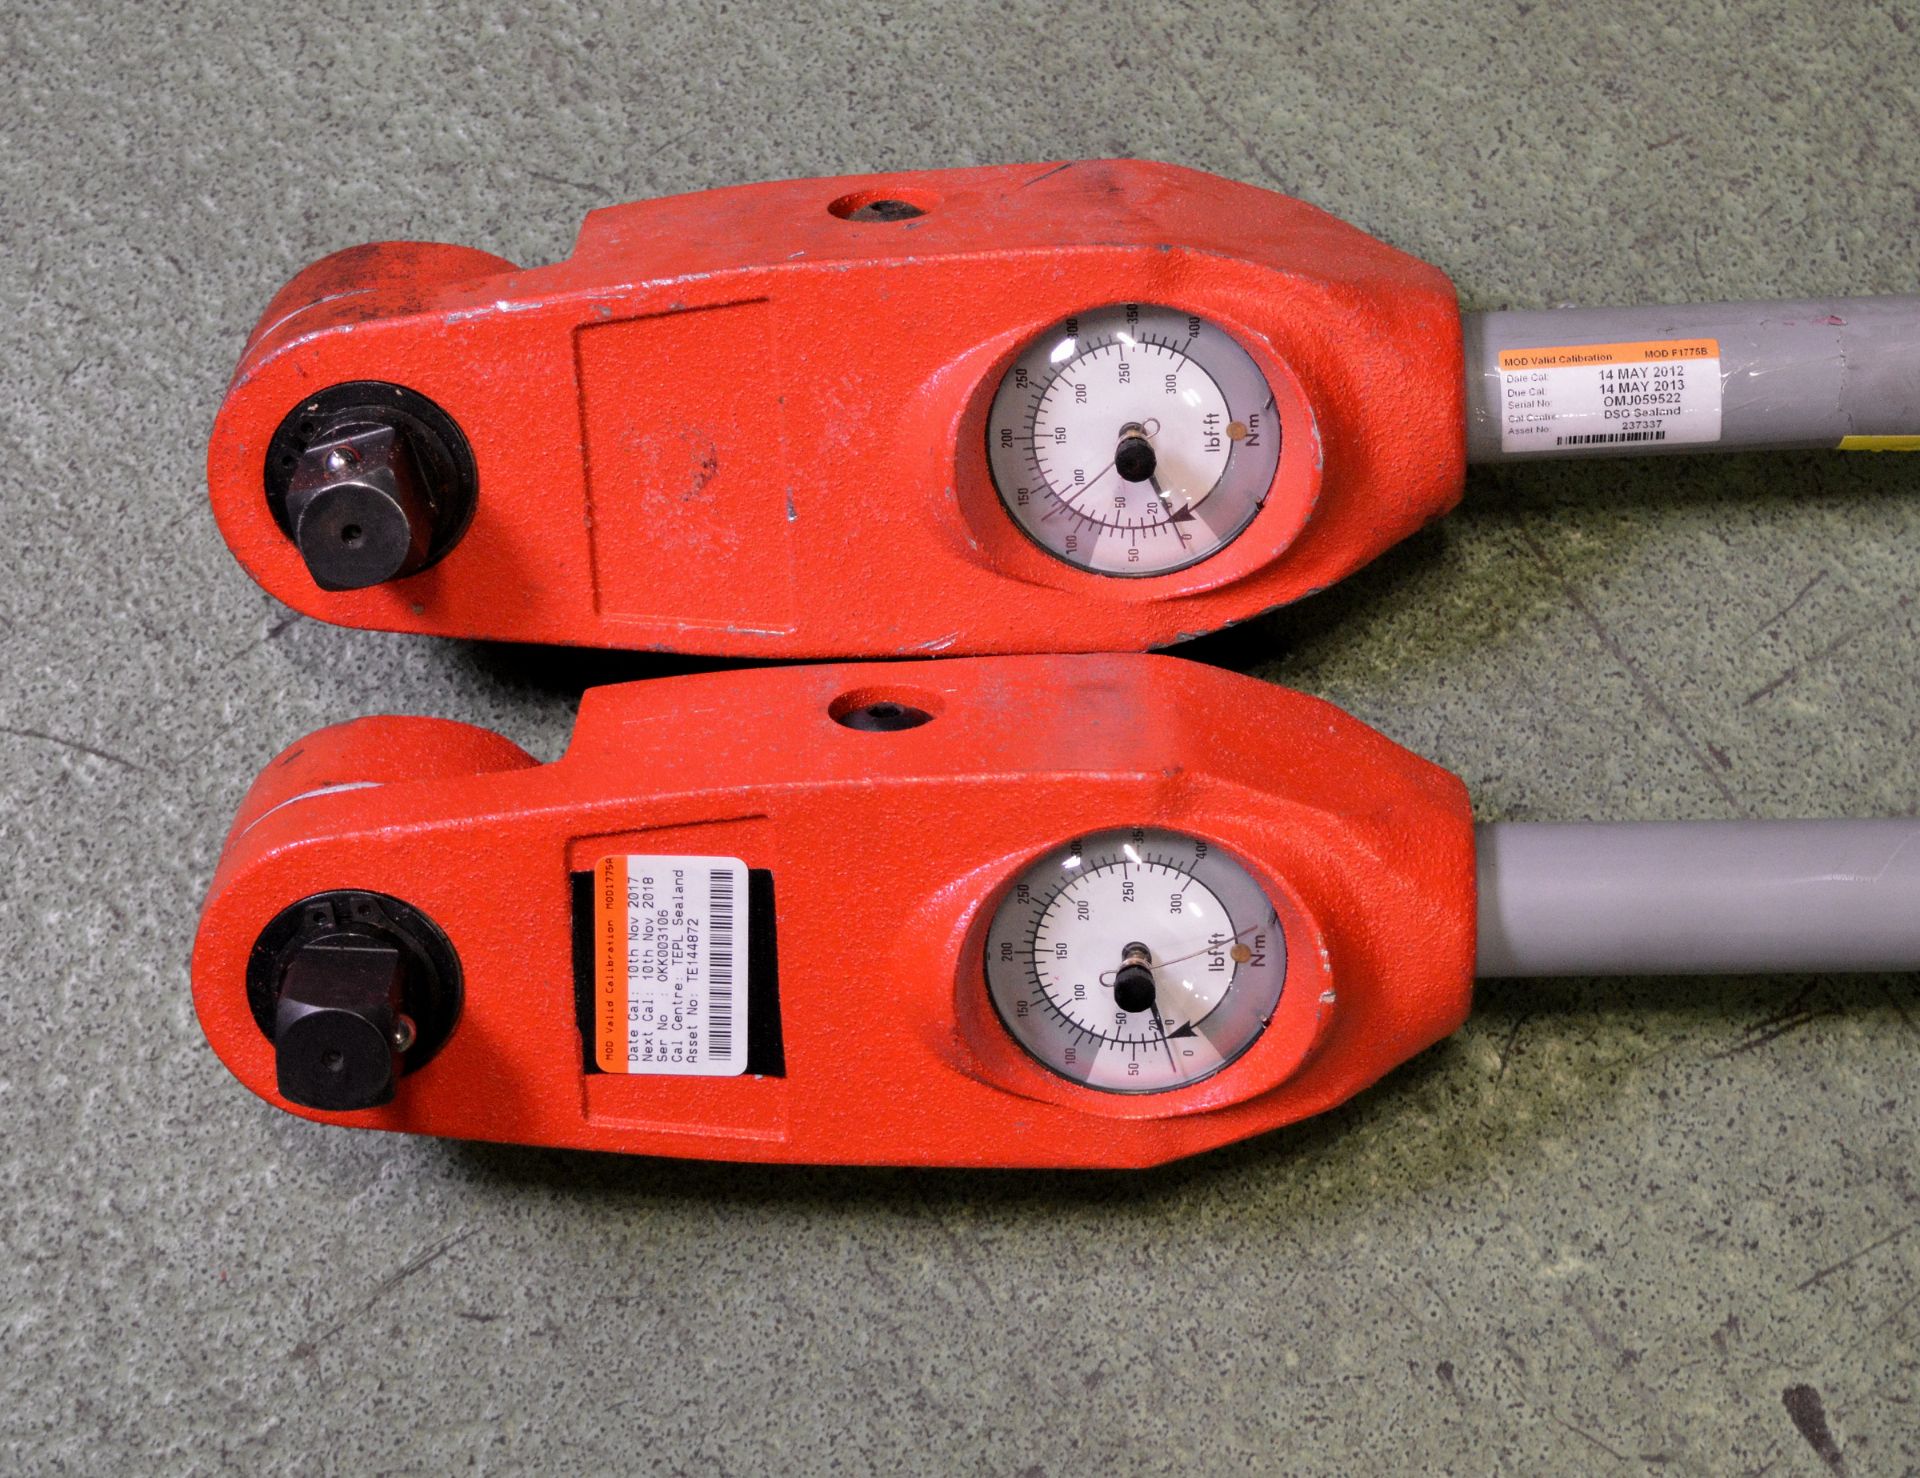 2x Dial Torque Wrenches 3/4in 0-400Nm - Image 2 of 2